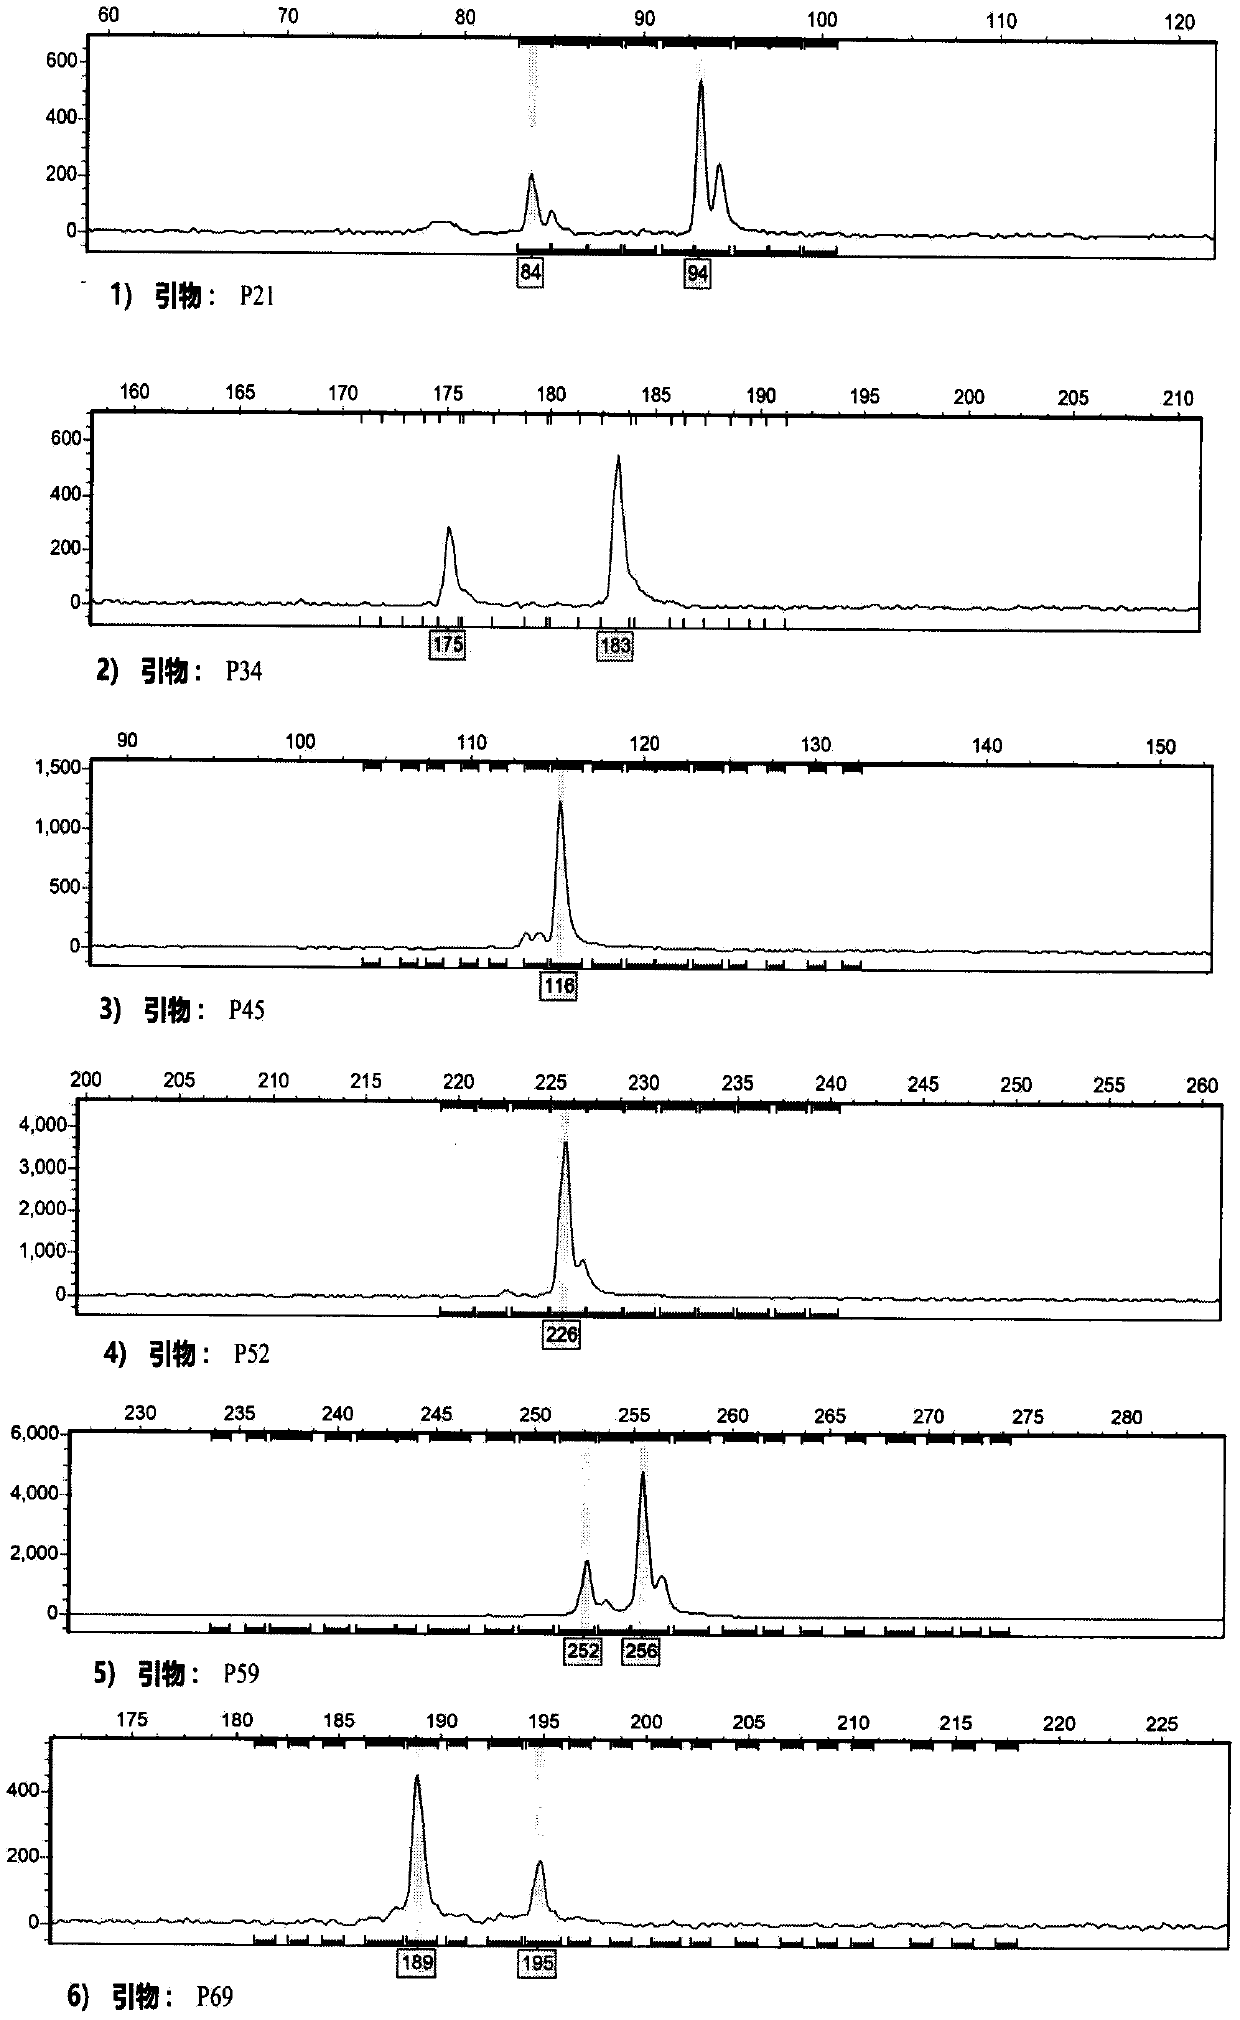 SSR (Simple Sequence Repeats) primer composition and method for identifying high-quality germplasm of picria fe-tearrae Lour.